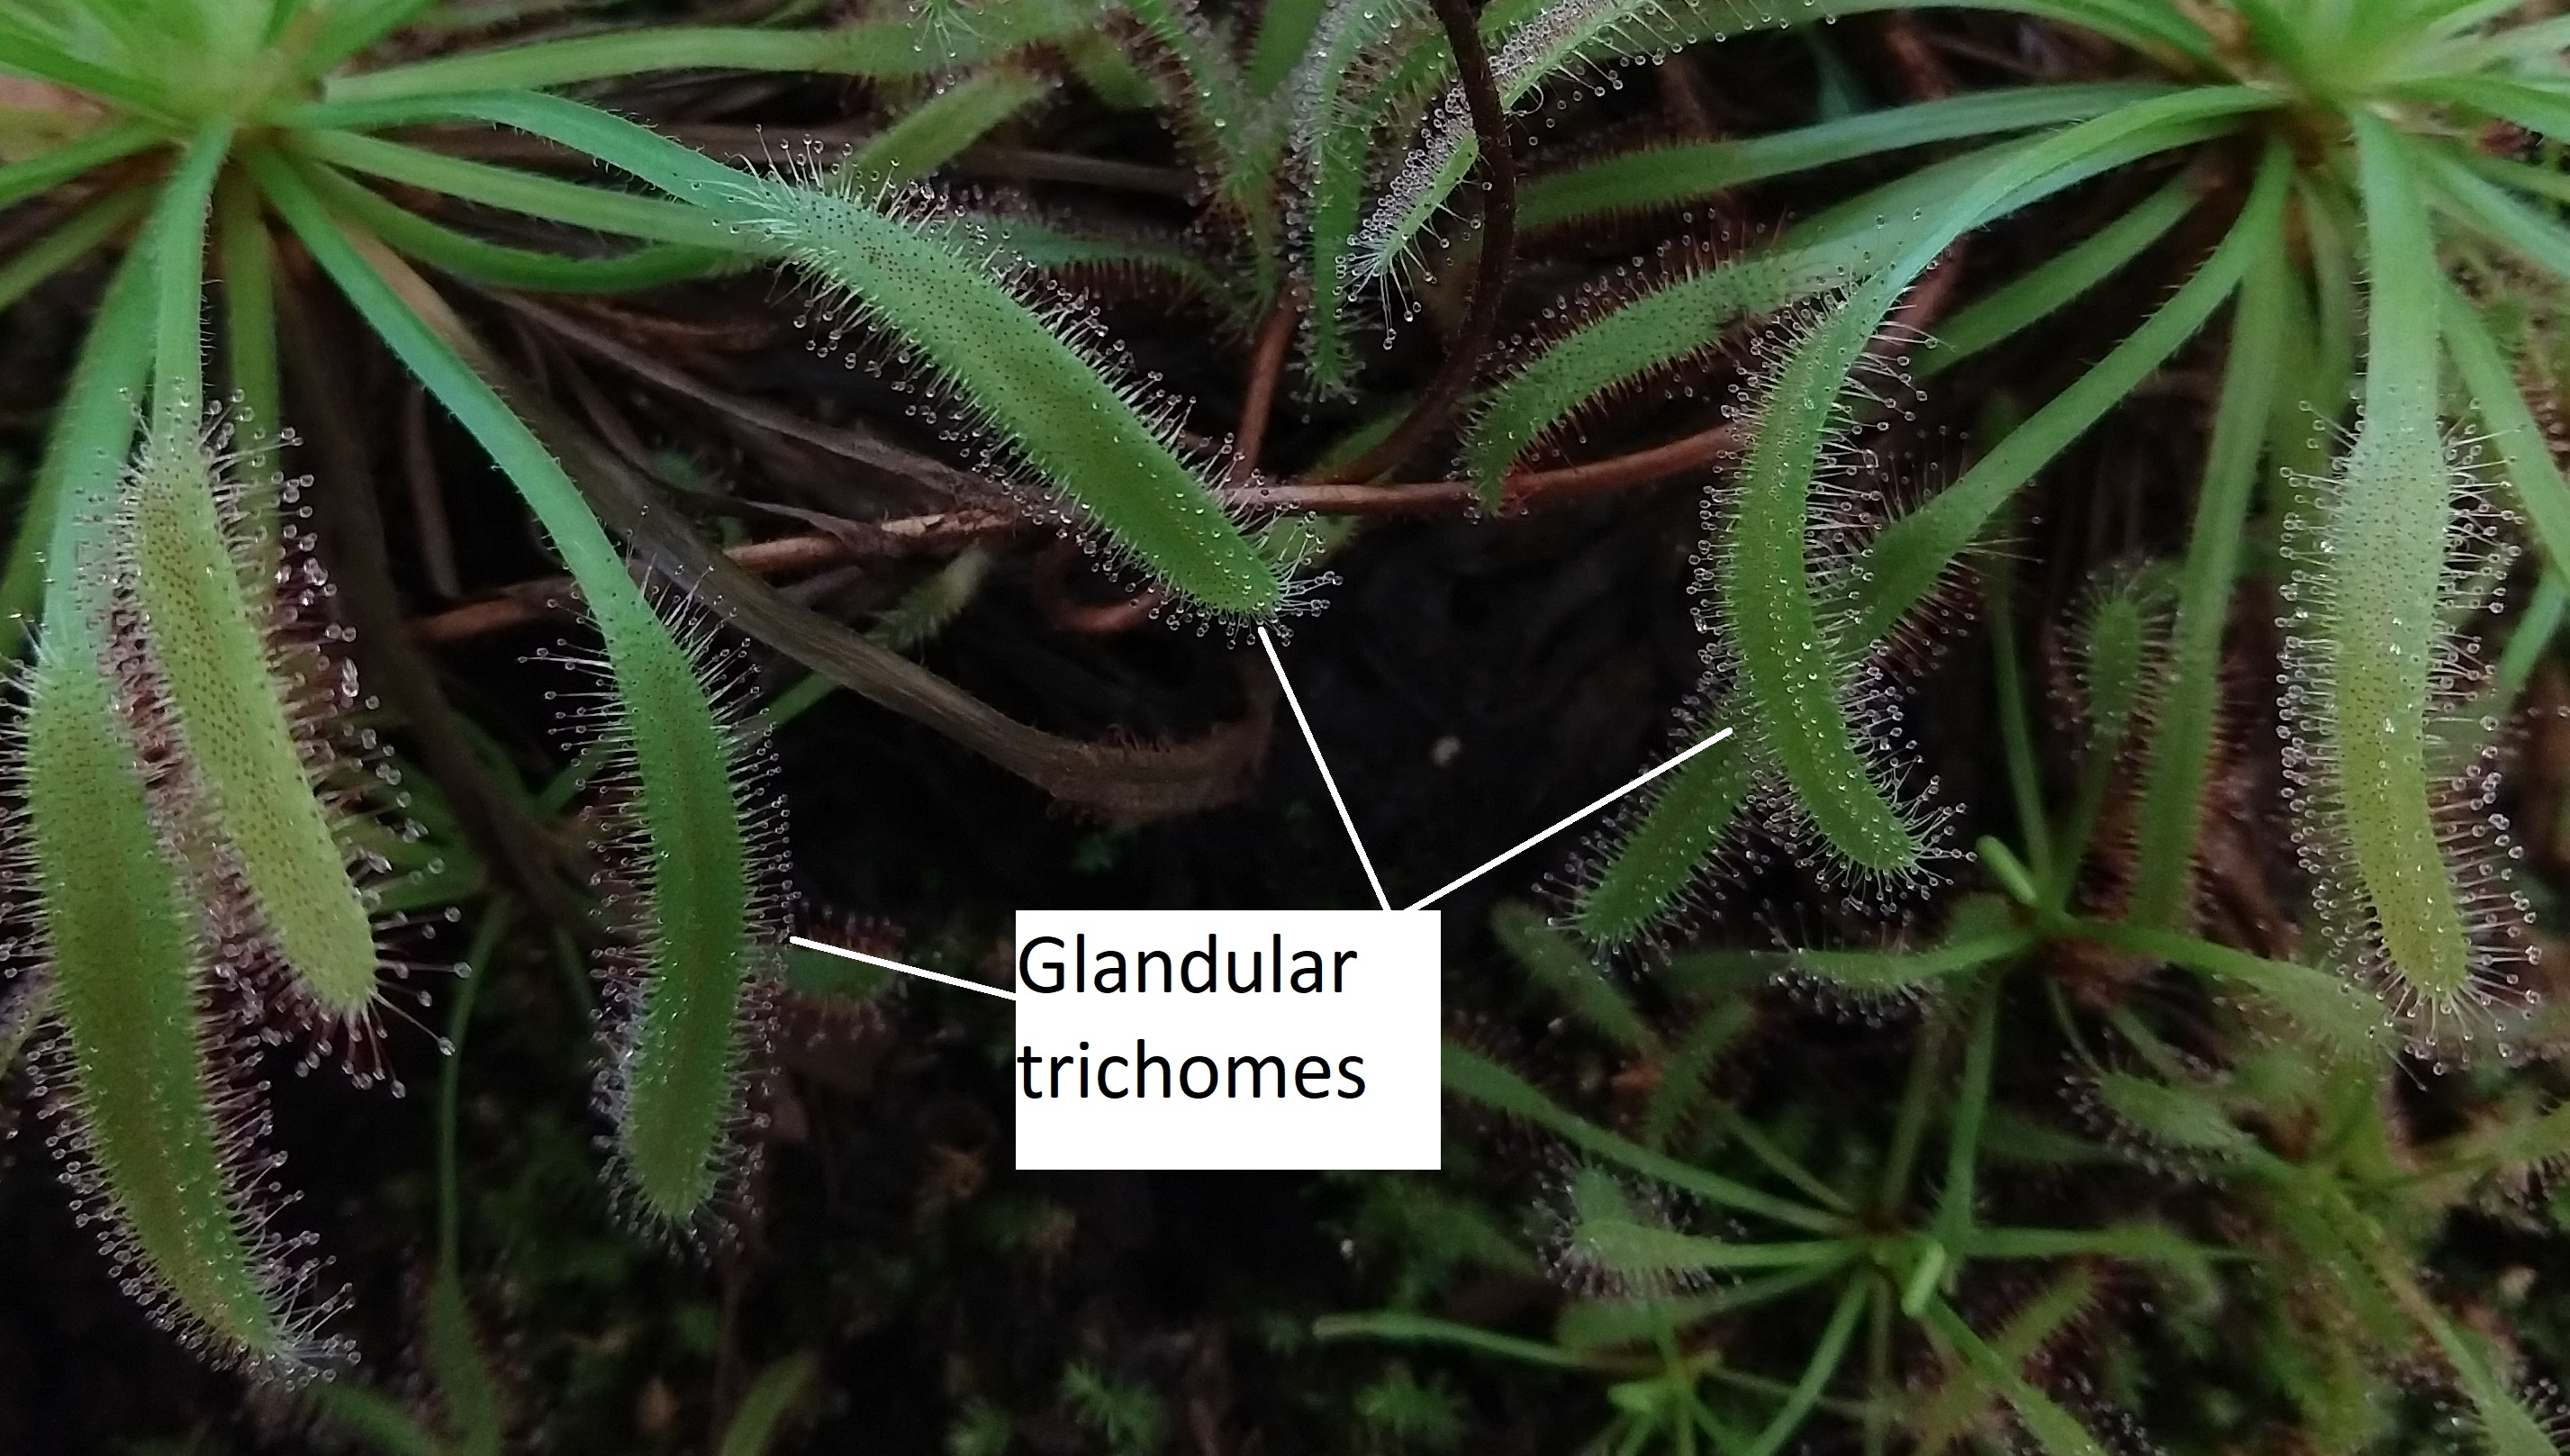 Several sundew plants covered with glandular trichomes